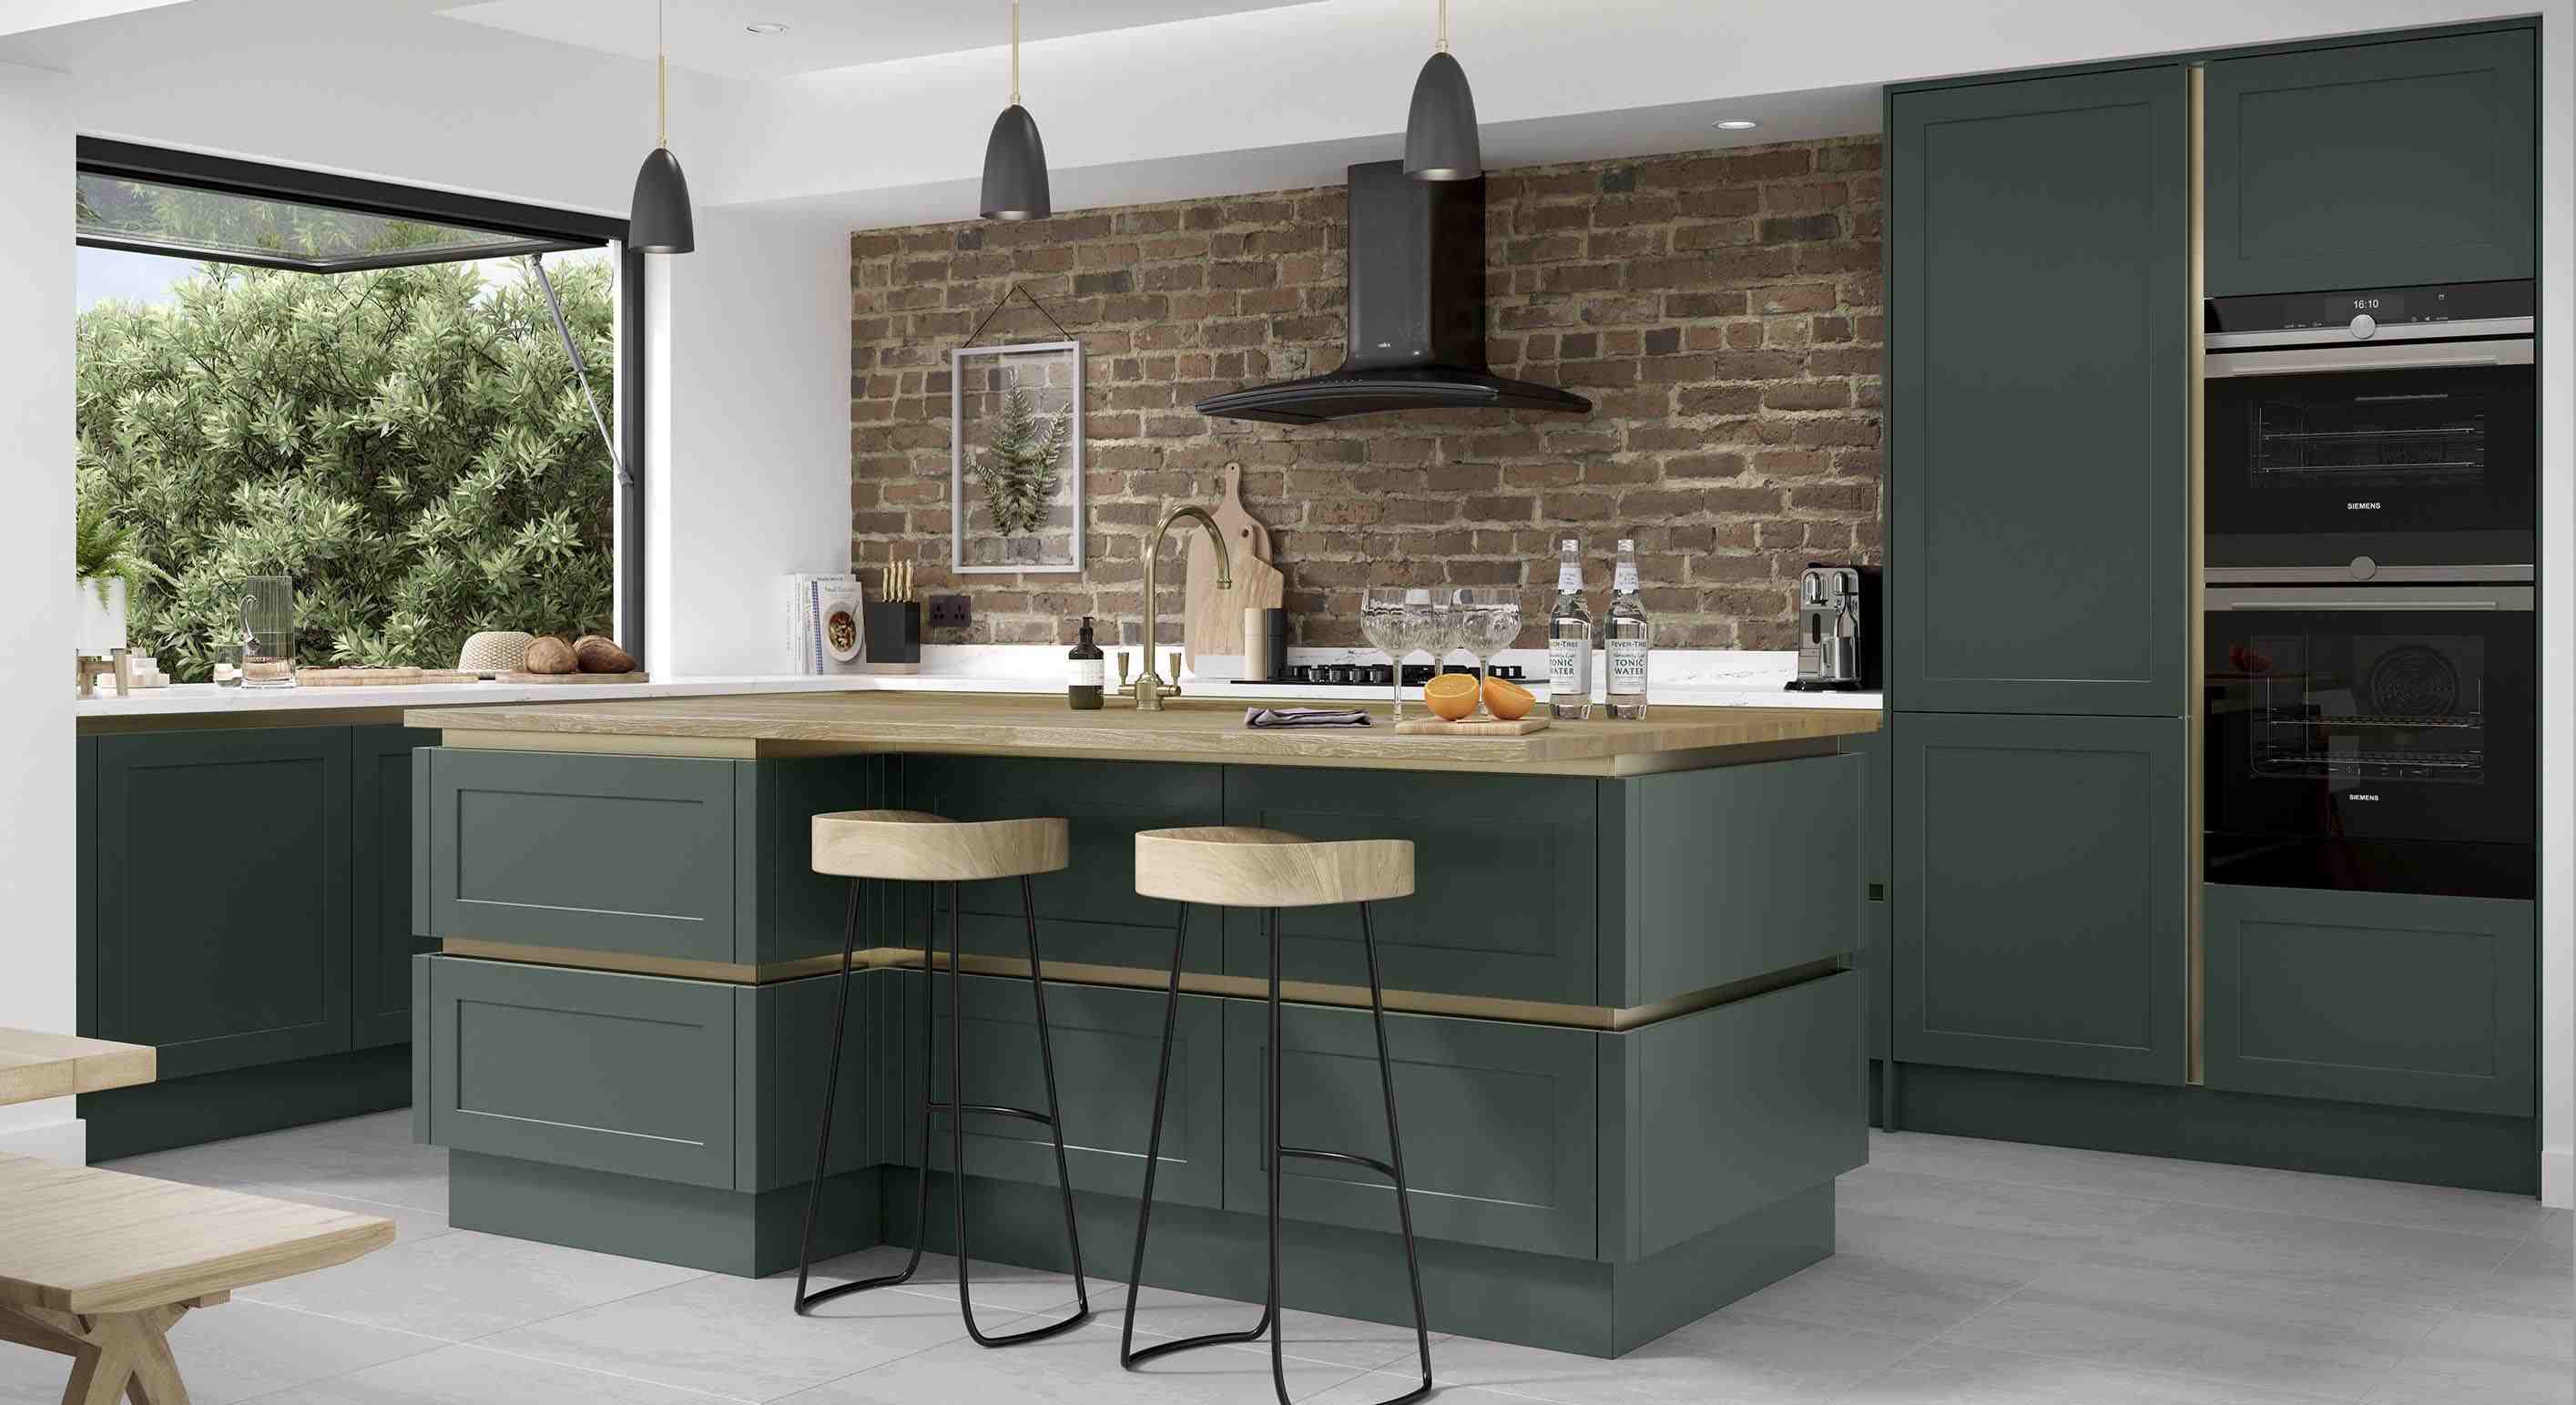 the simplistic, understated style of the clifden range offers ultimate versatility when it comes to devising the perfect kitchen space. its widespread appeal means it sits right at home in a country setting and fuses perfectly with contemporary elements such as the glazed patio doors and modern integrated seating area, resulting in a flawless, functional space.